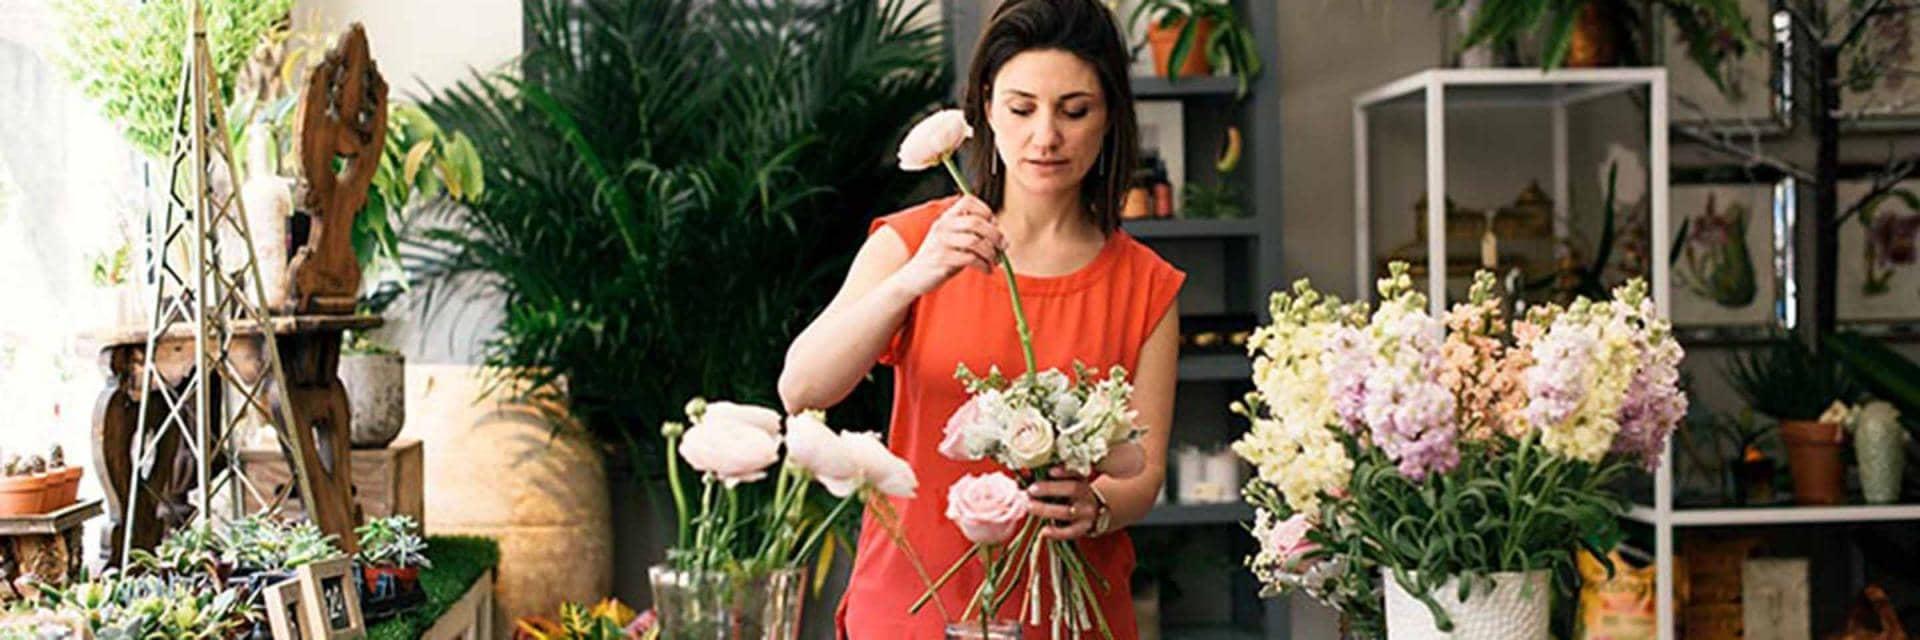 A woman is arranging flowers.